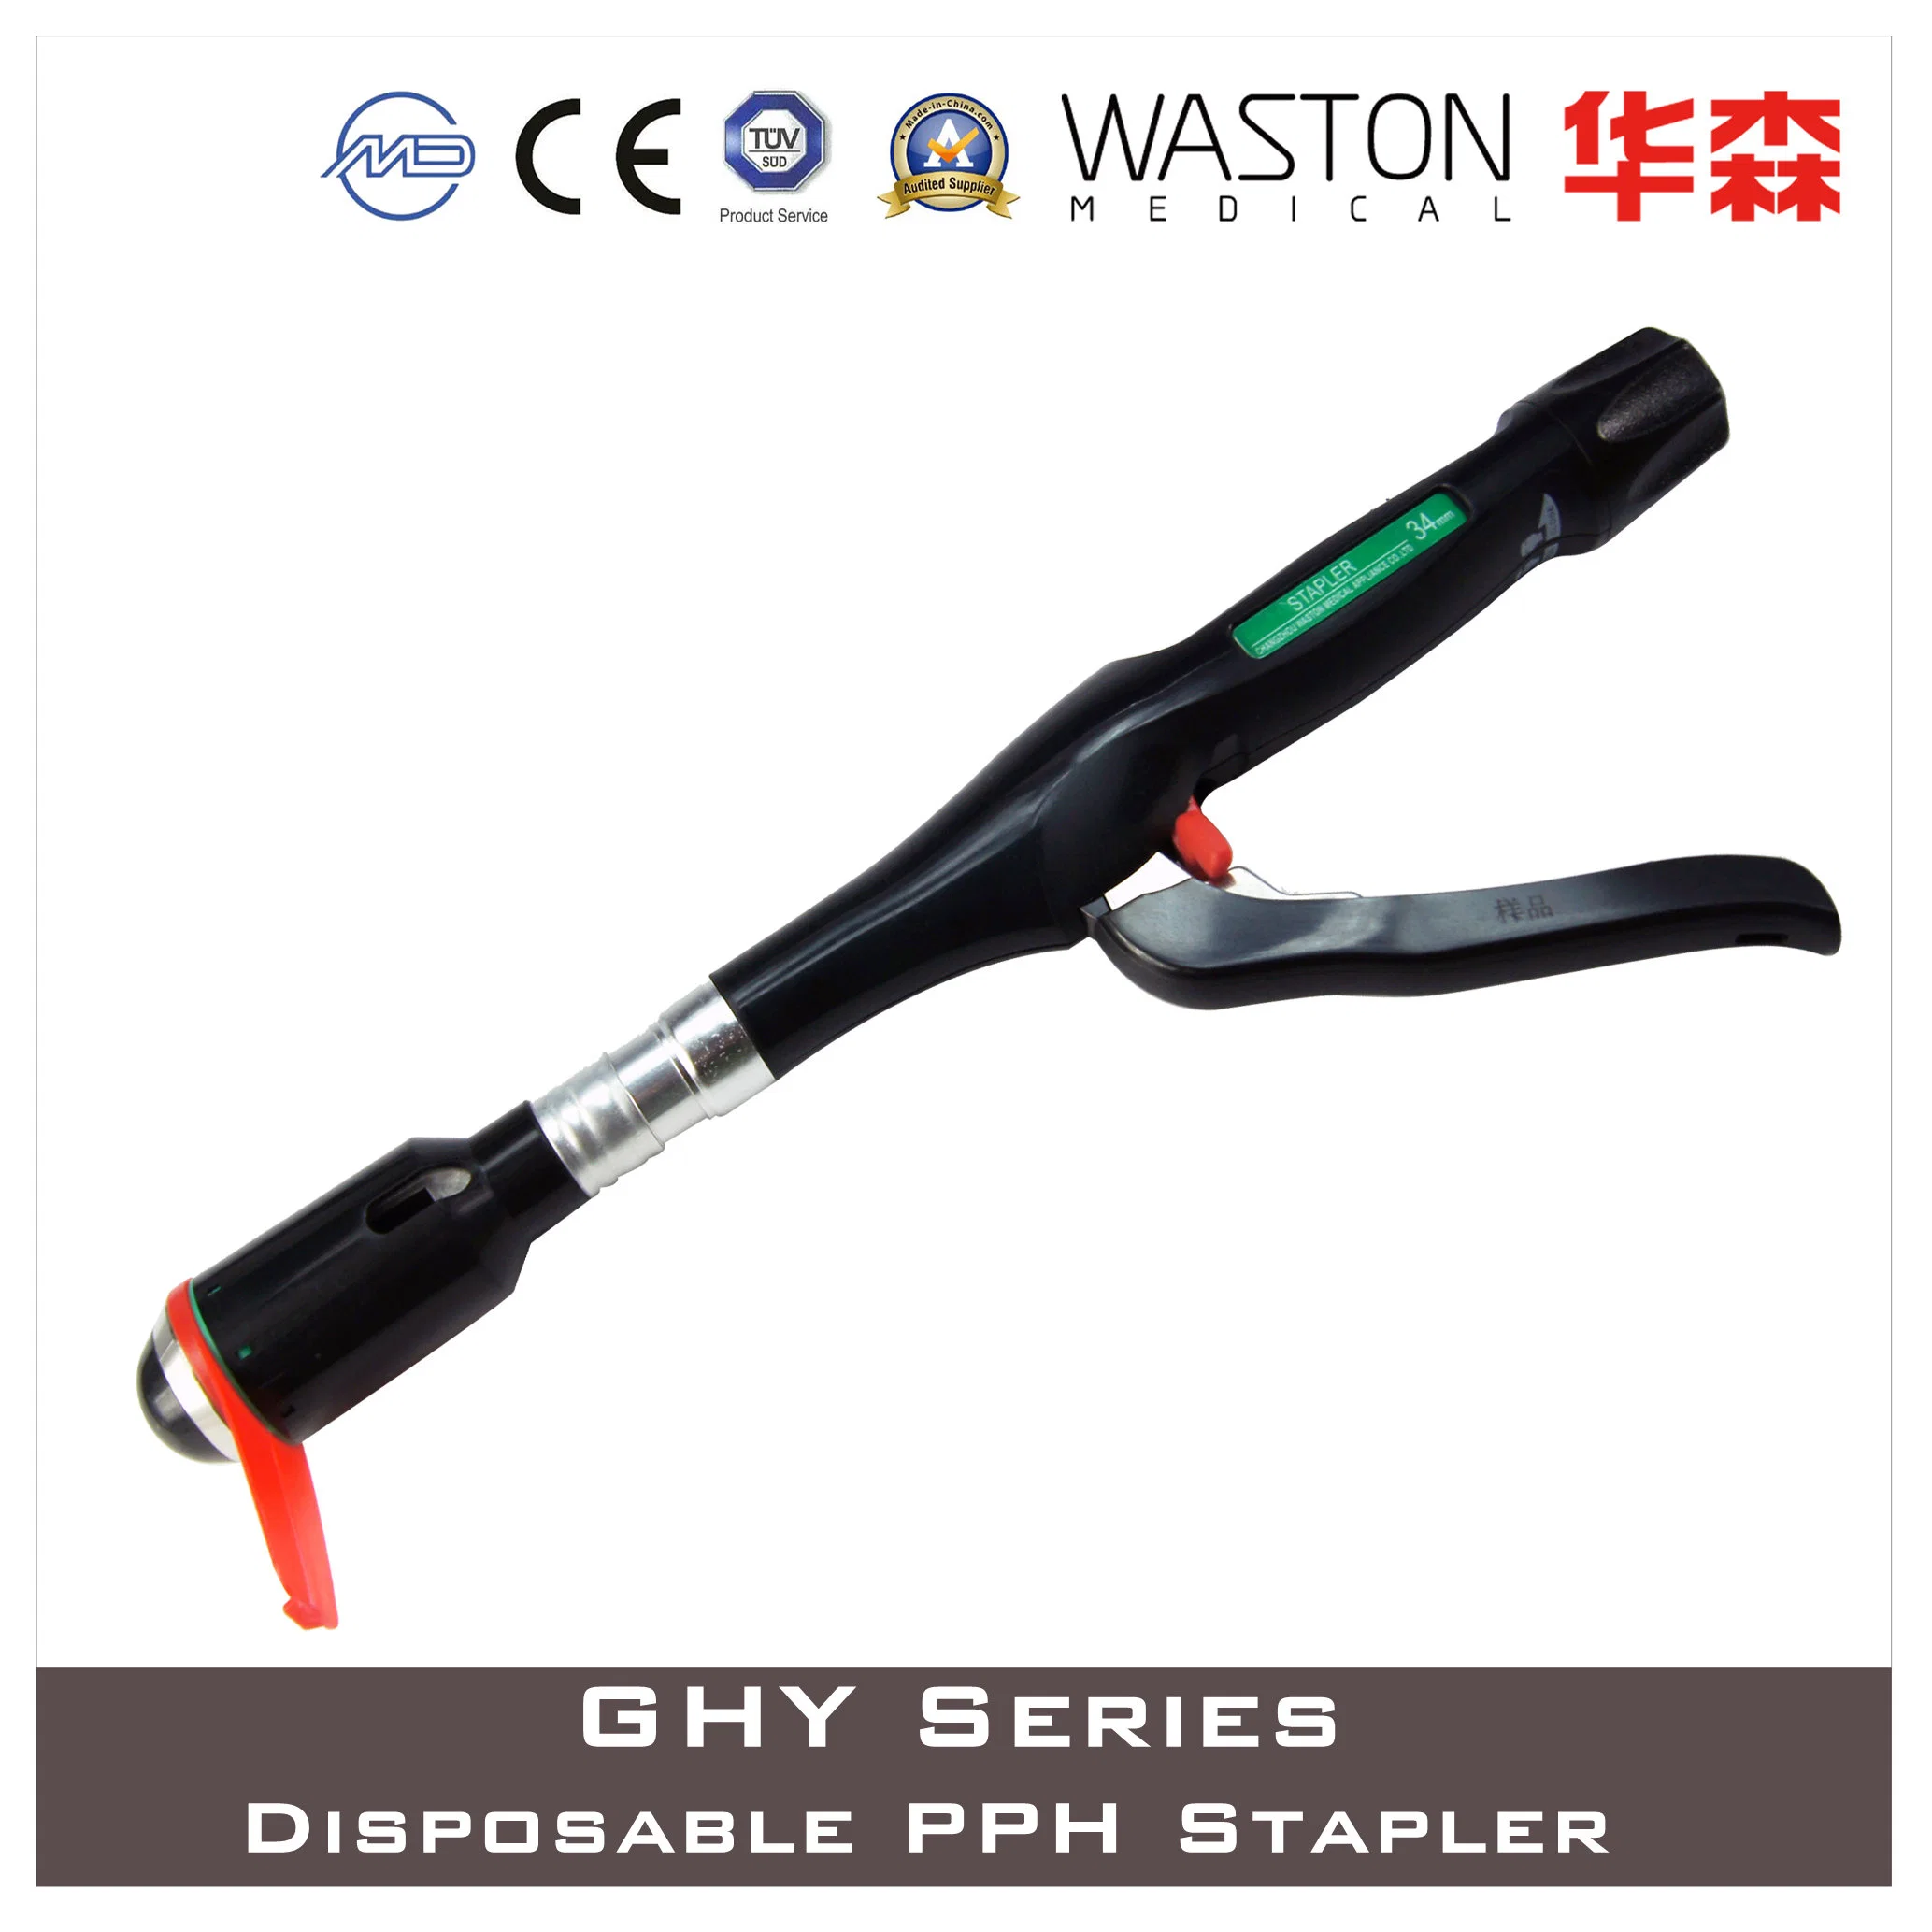 Disposable Anorectal Surgical Stapler for Pph Manufacturer